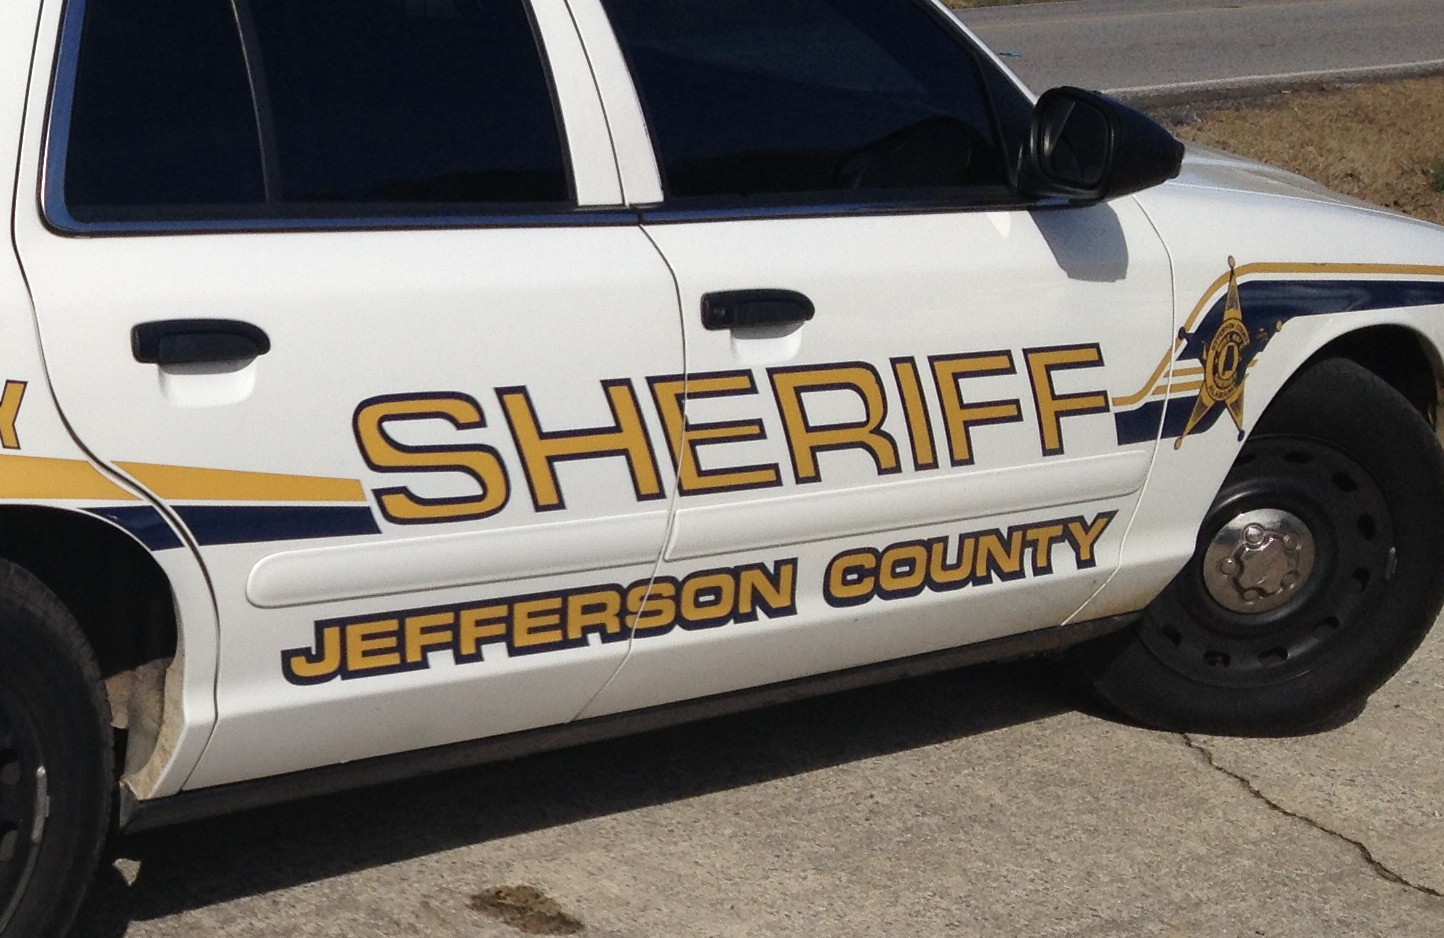 Stolen property recovered after burglary in Jefferson County 